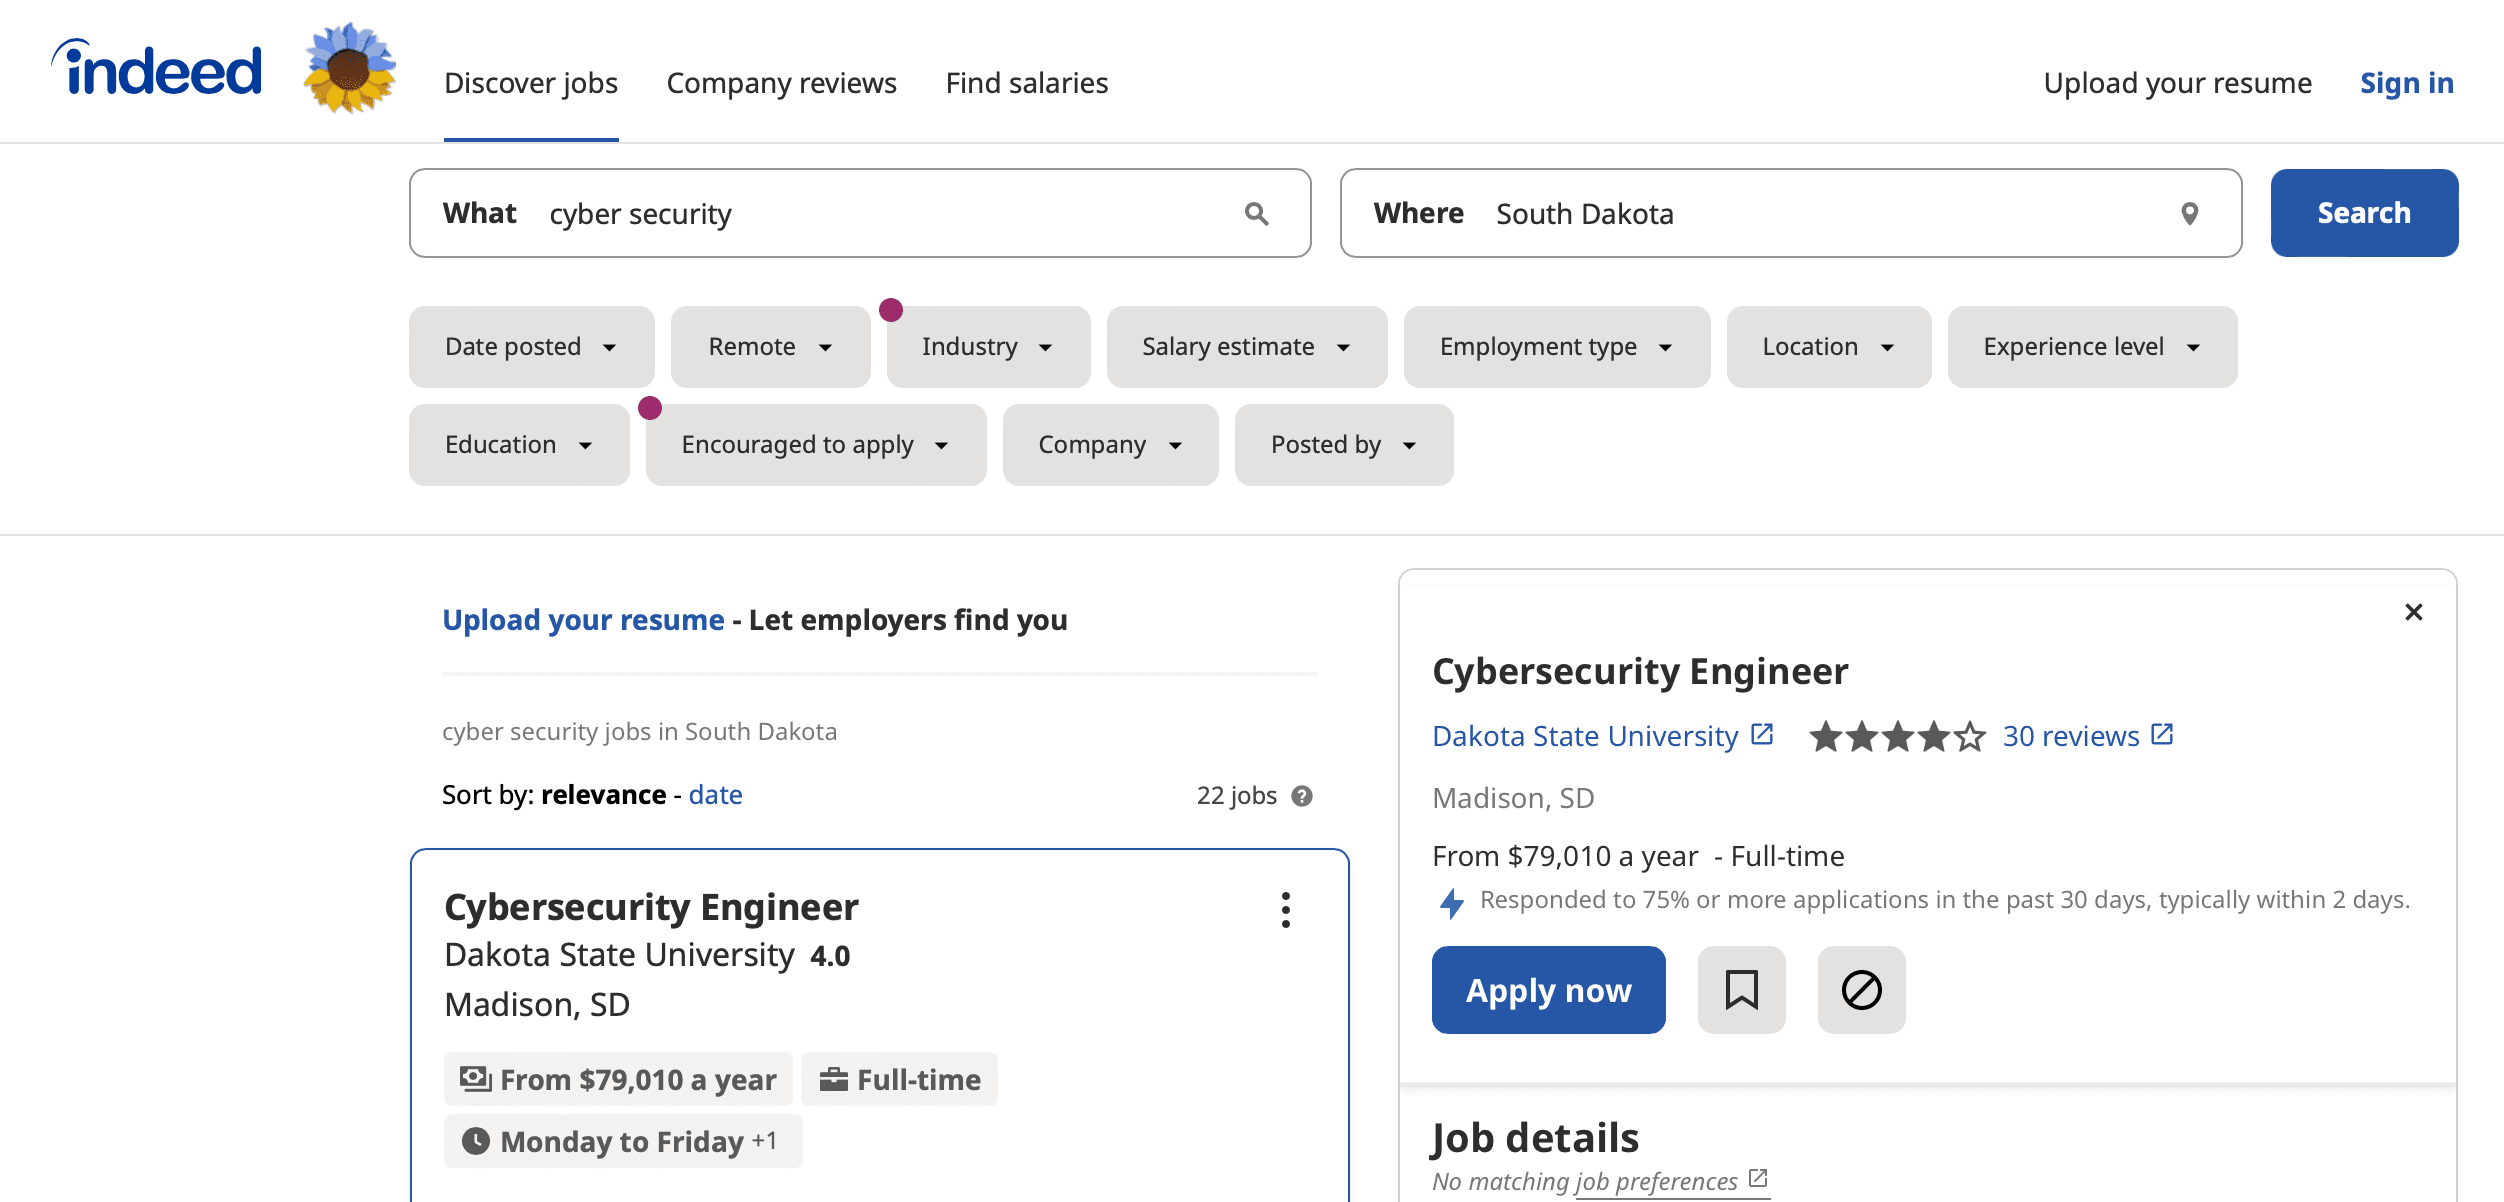 Jobs boards are not the best source of job opportunities!